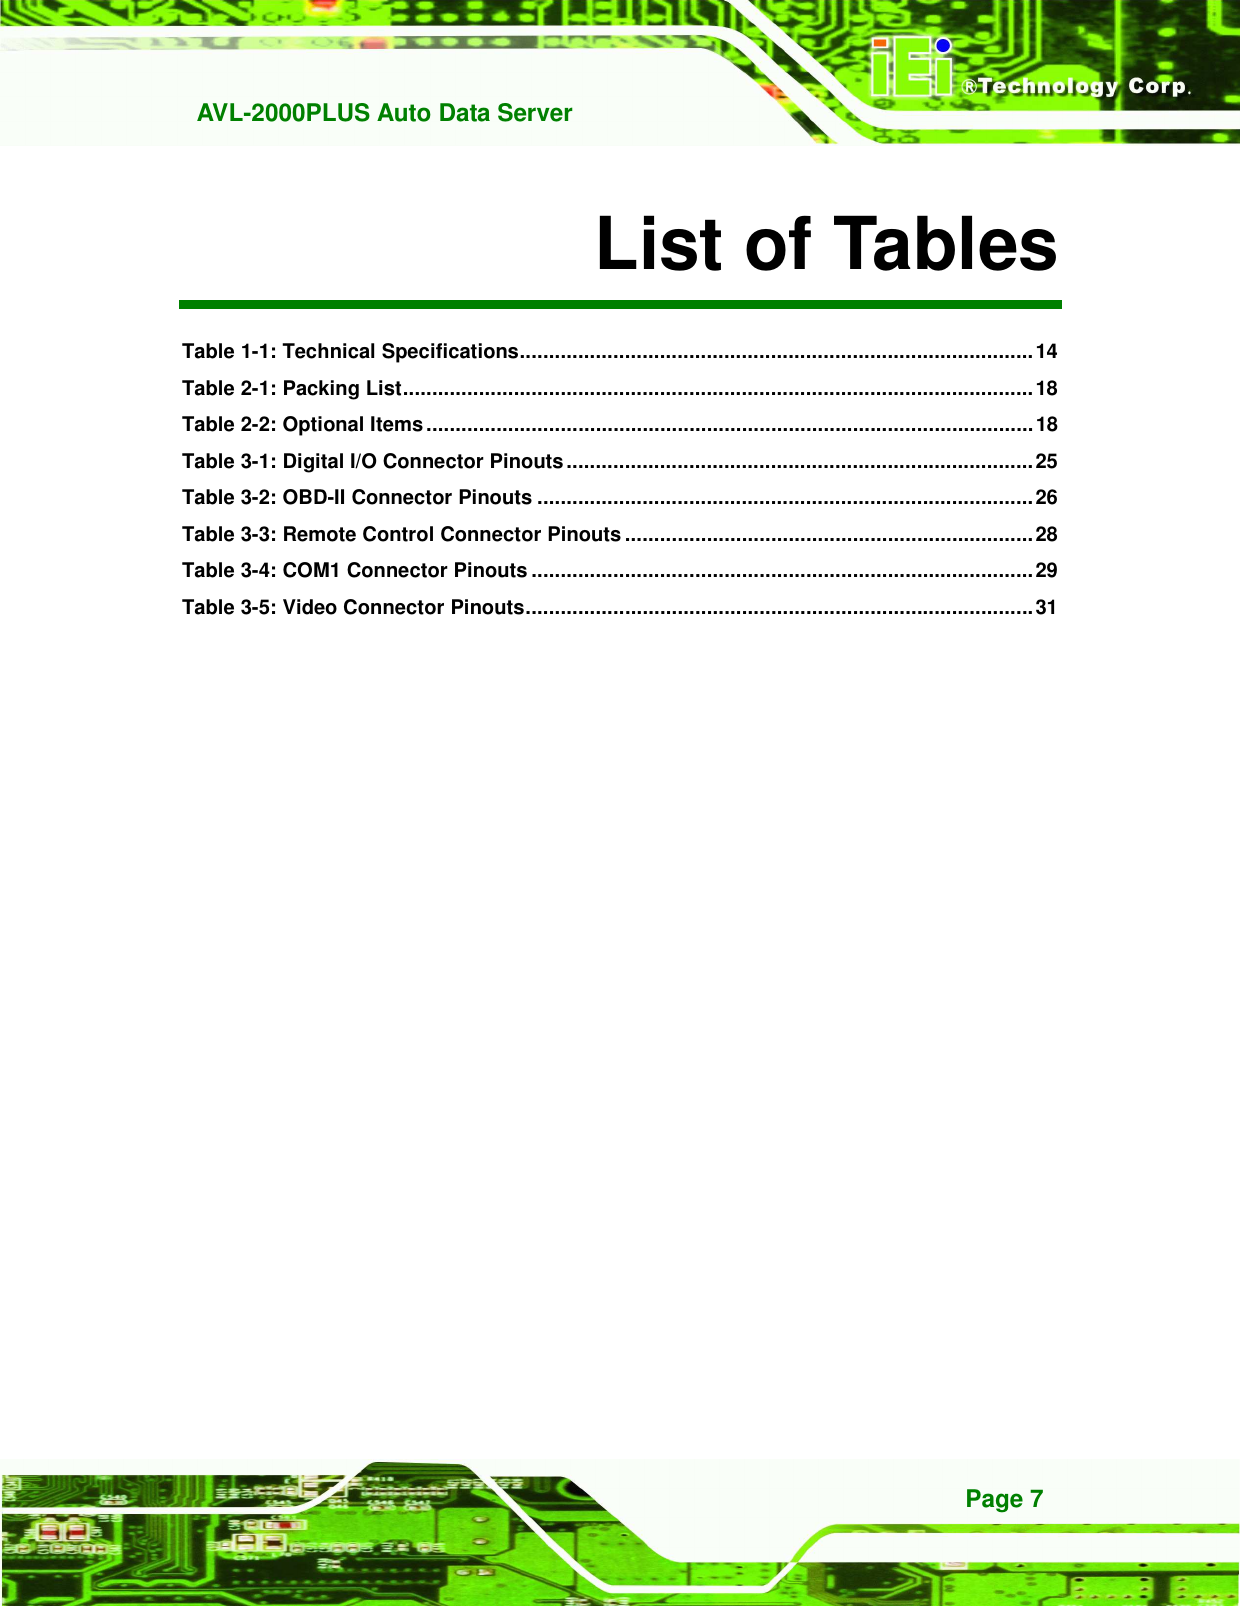   AVL-2000PLUS Auto Data Server Page 7 List of Tables Table 1-1: Technical Specifications........................................................................................14 Table 2-1: Packing List............................................................................................................18 Table 2-2: Optional Items ........................................................................................................18 Table 3-1: Digital I/O Connector Pinouts................................................................................25 Table 3-2: OBD-II Connector Pinouts .....................................................................................26 Table 3-3: Remote Control Connector Pinouts ......................................................................28 Table 3-4: COM1 Connector Pinouts ......................................................................................29 Table 3-5: Video Connector Pinouts.......................................................................................31  